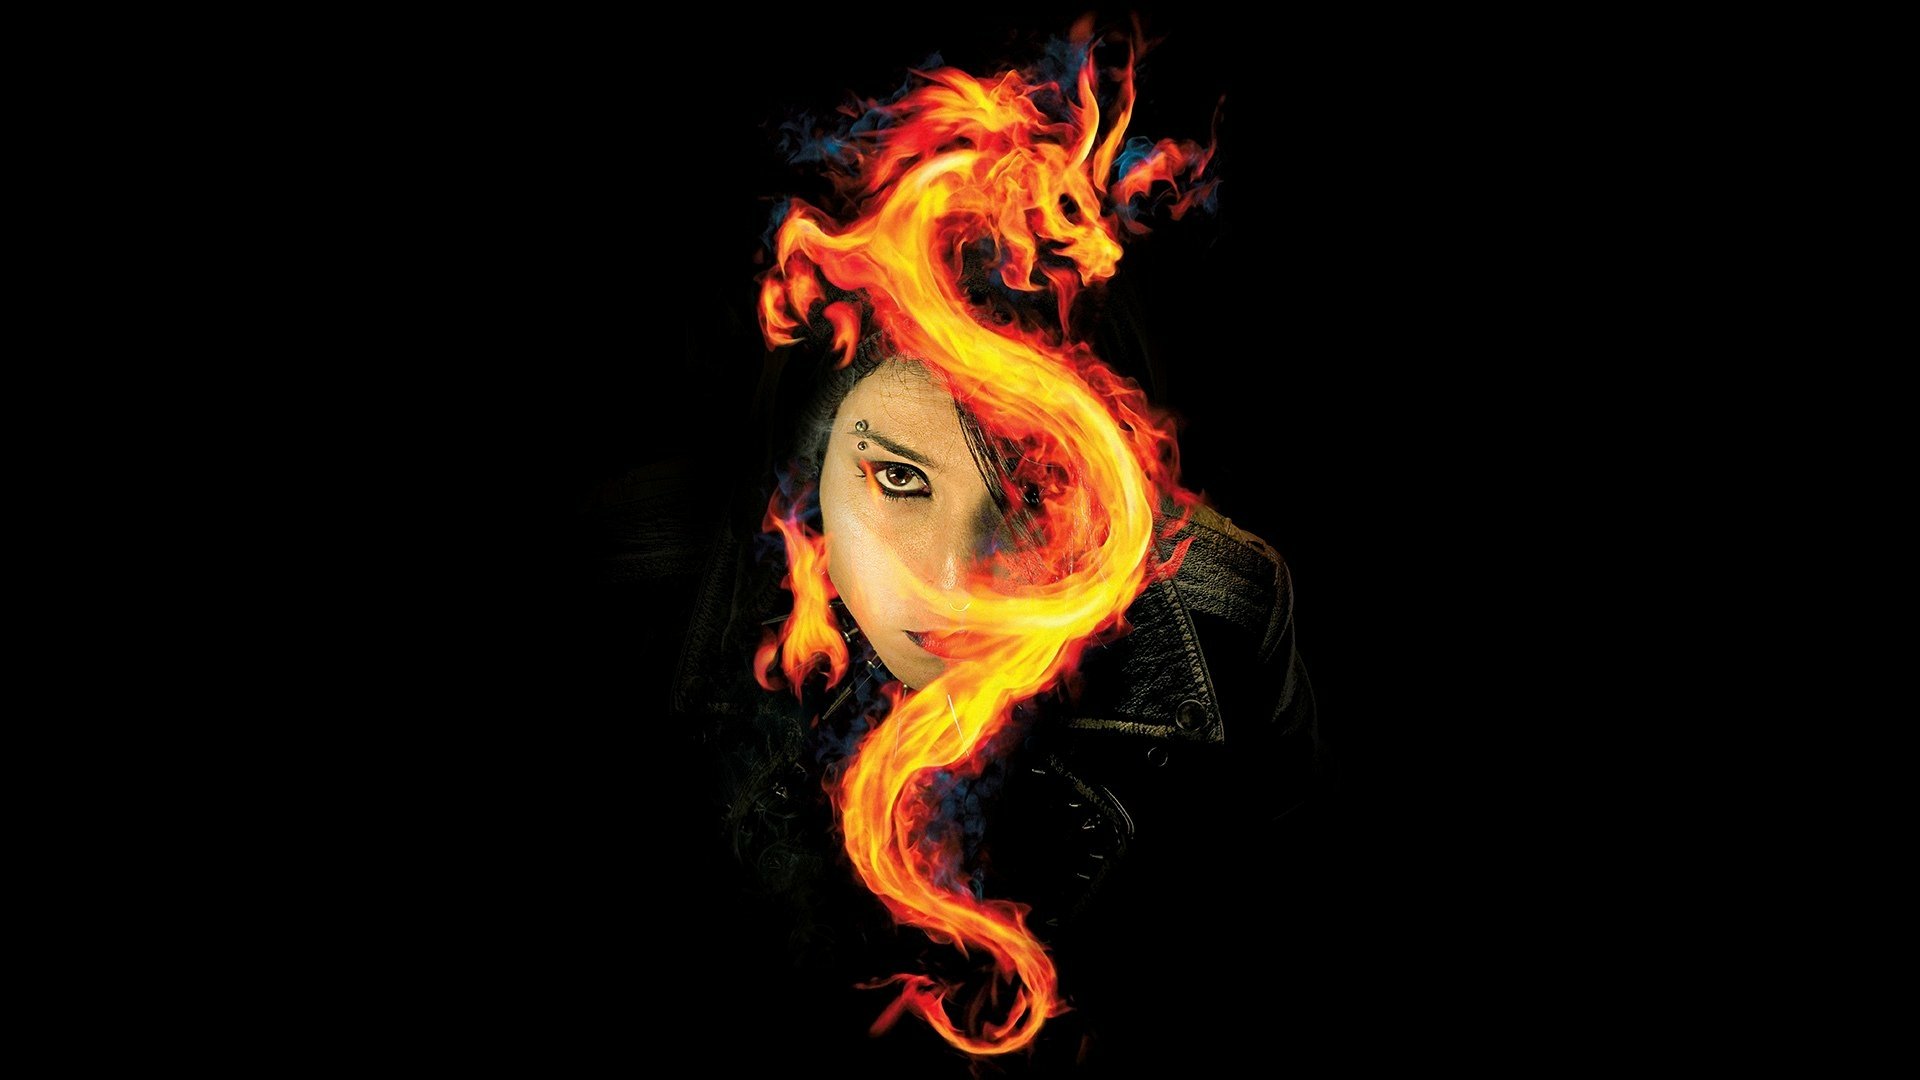 The Girl Who Played With Fire Hd Wallpaper Background Image 19x1080